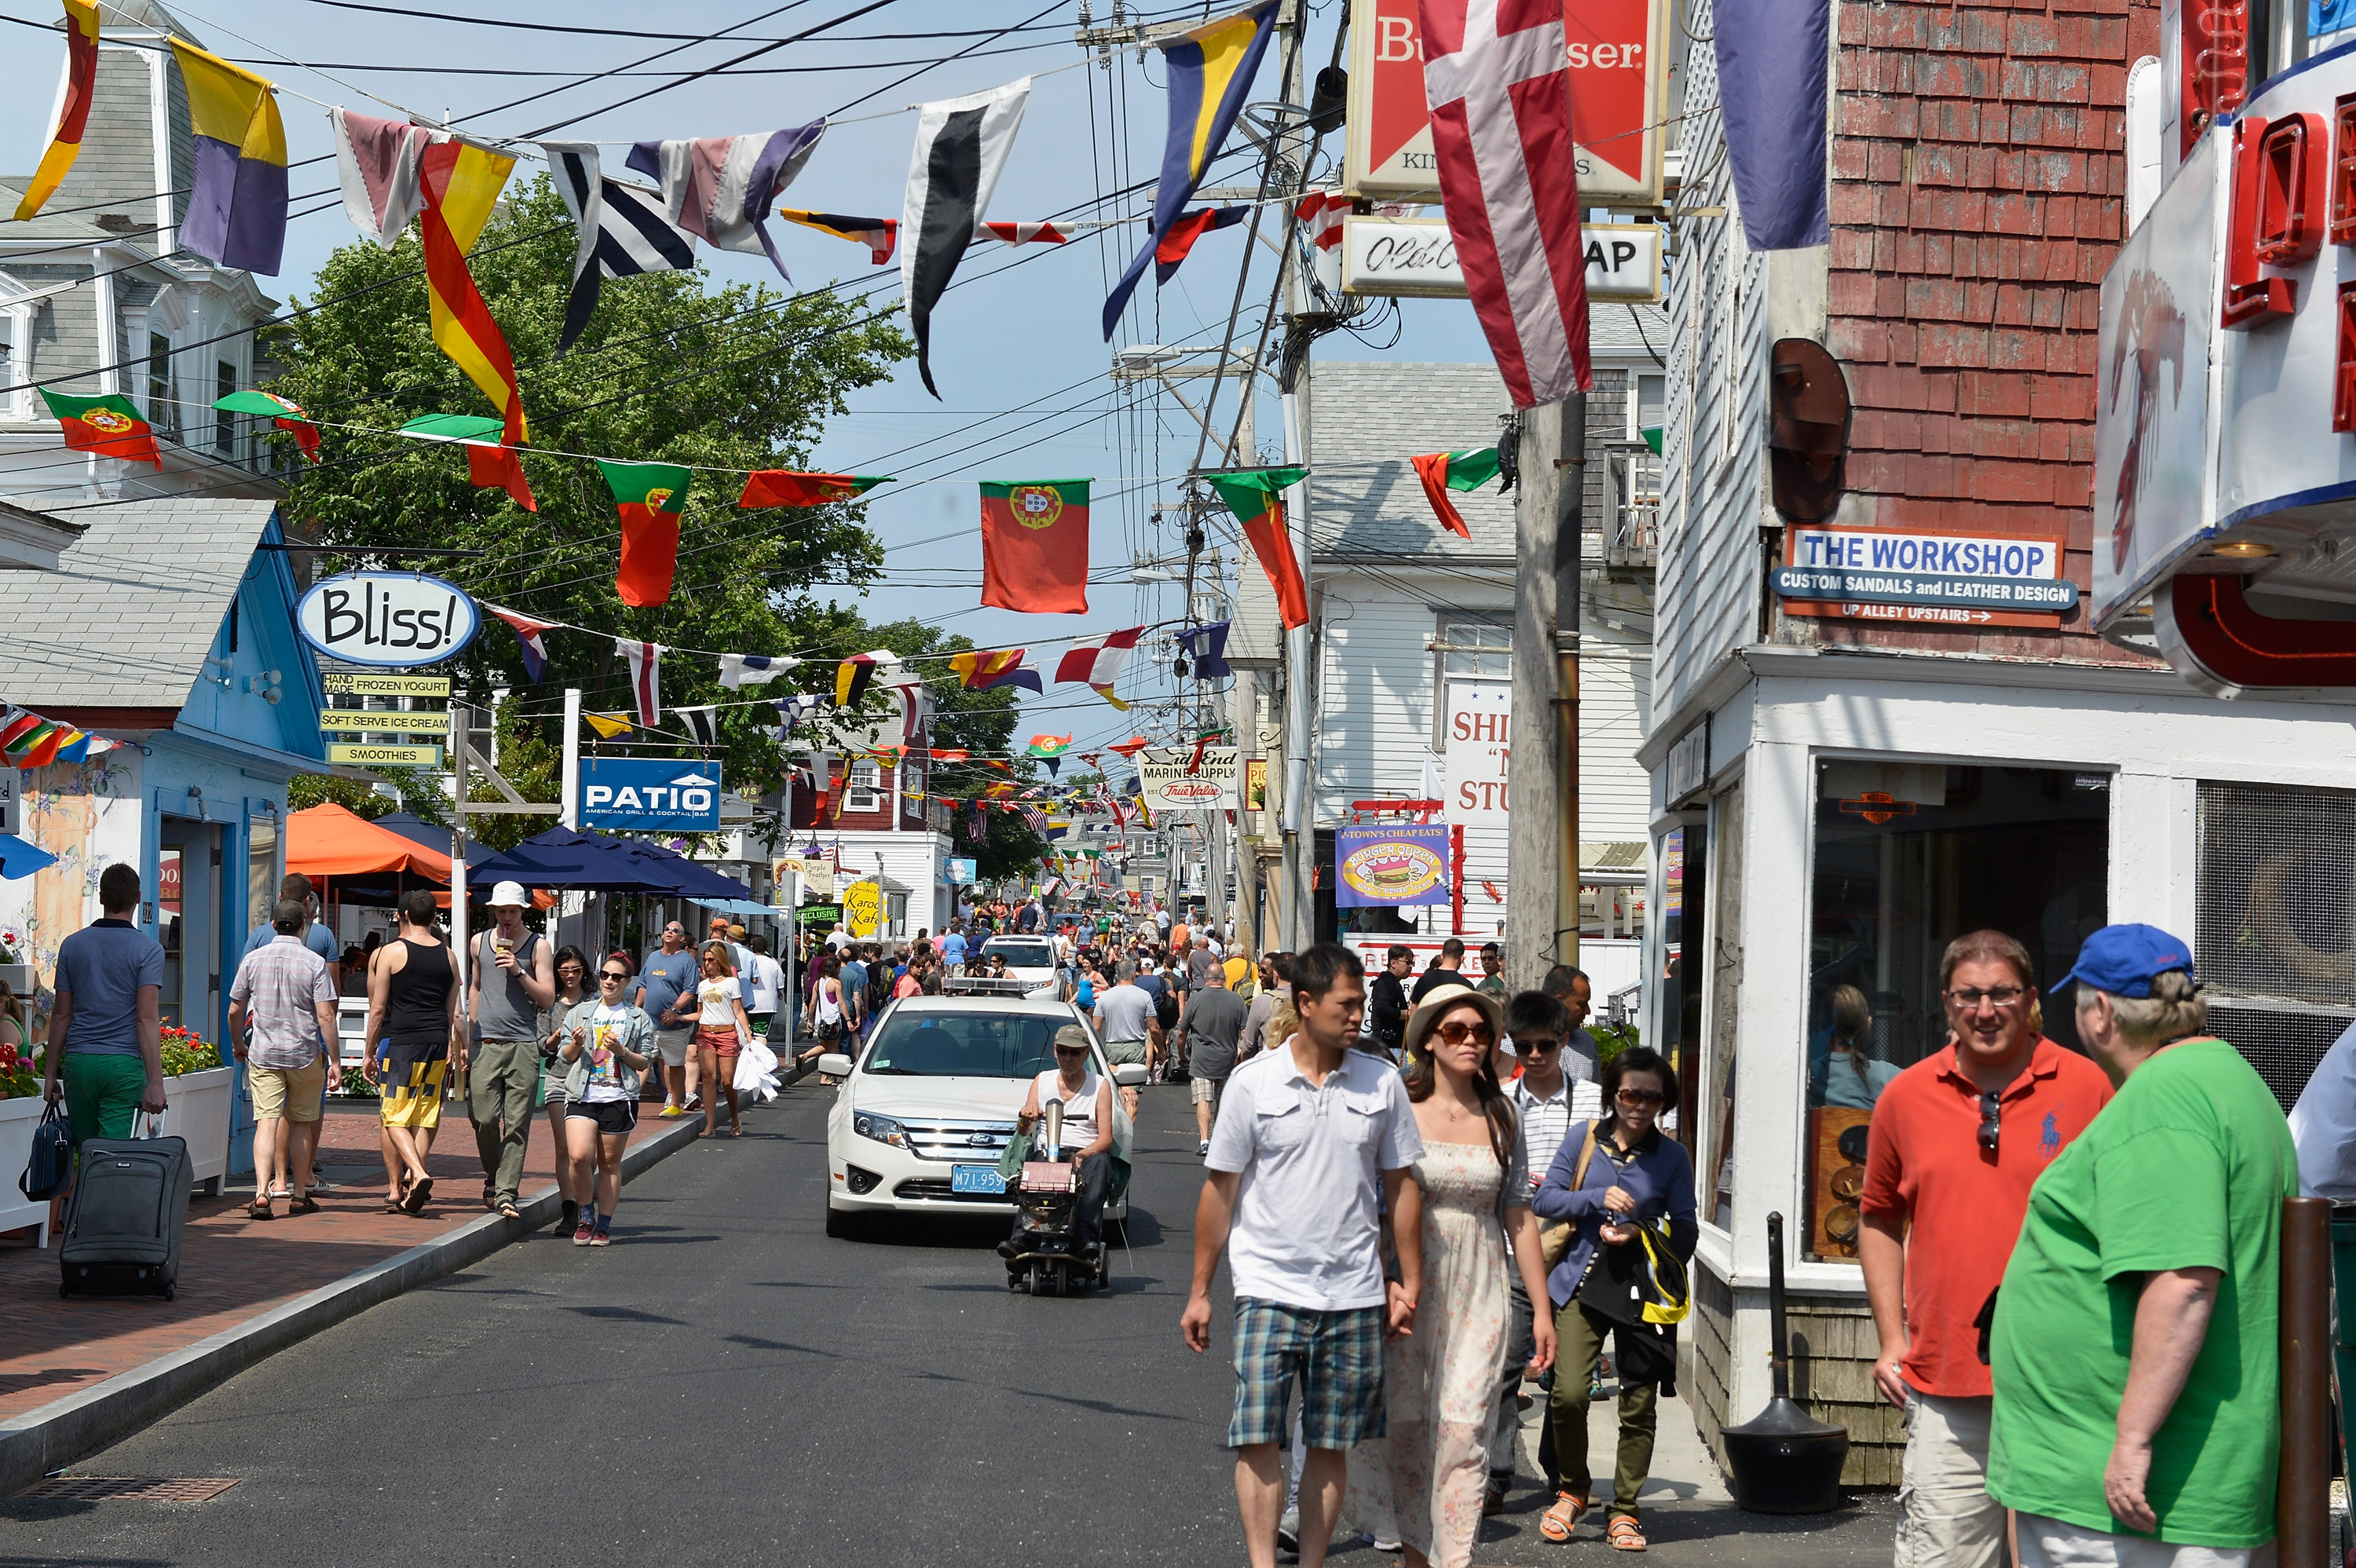 A general view of Provincetown on June 22, 2013. (Paul Marotta&mdash;Getty Images)